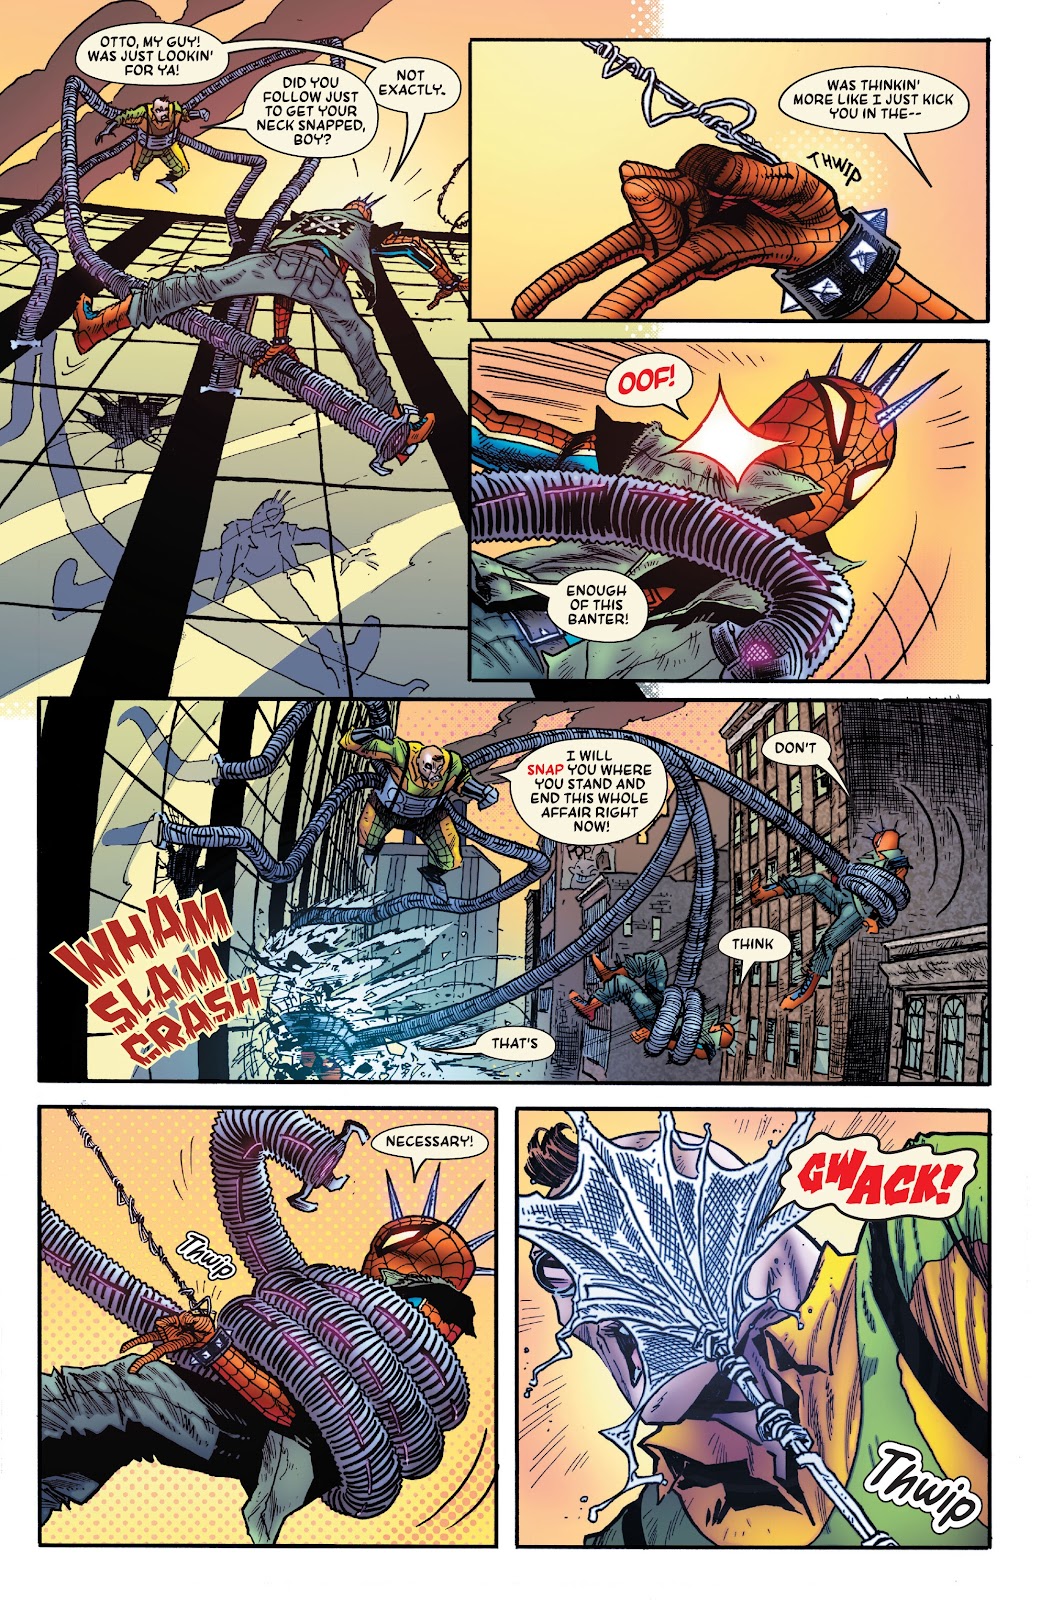 Spider-Punk: Arms Race issue 3 - Page 15